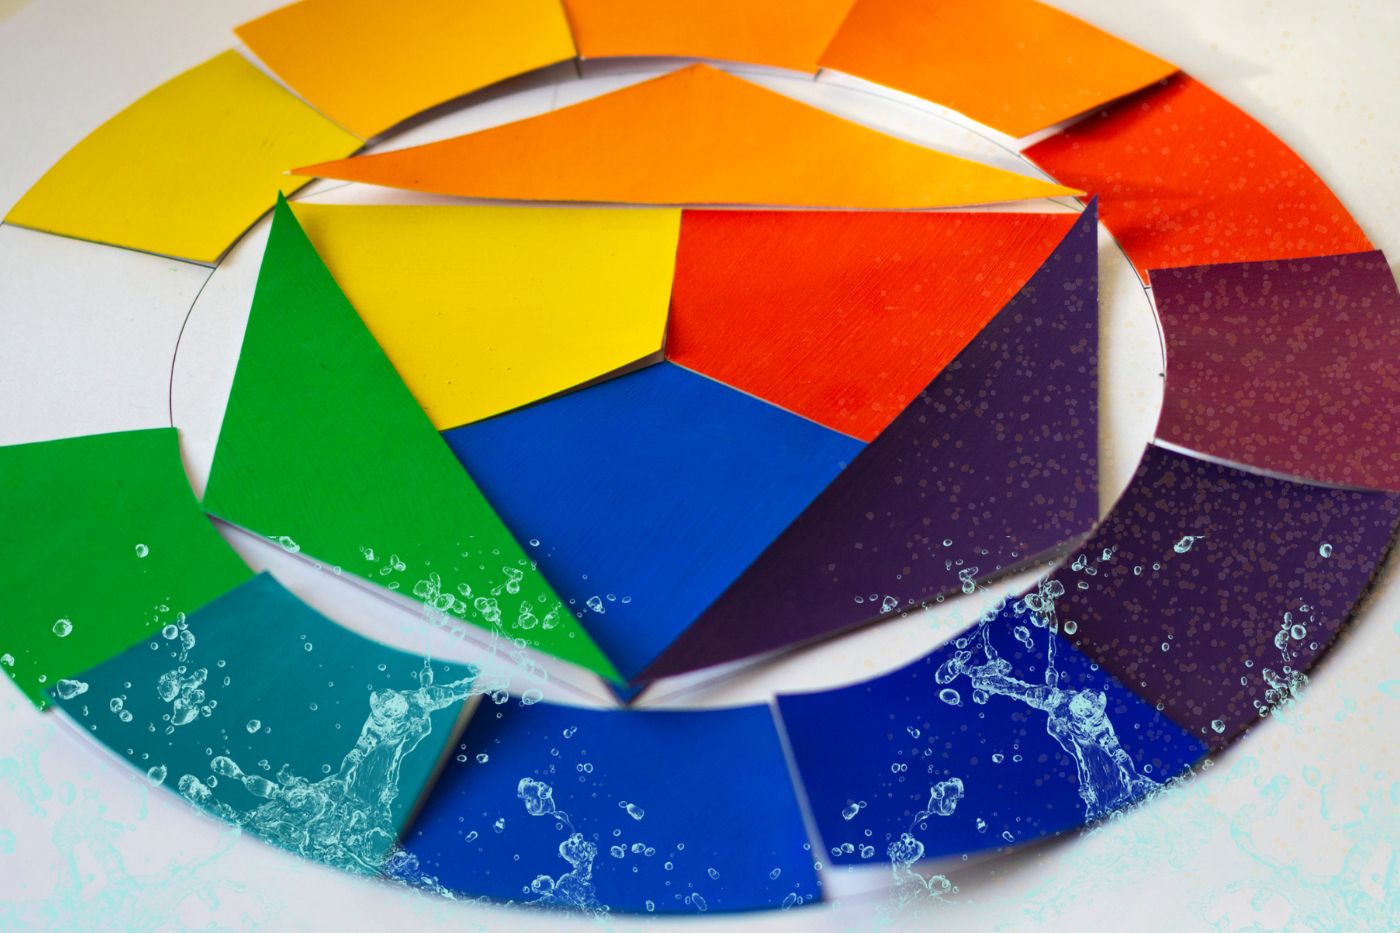 Read more about the article Understanding the Color Wheel- 12 Different Color Schemes Used by Artists and Designers.